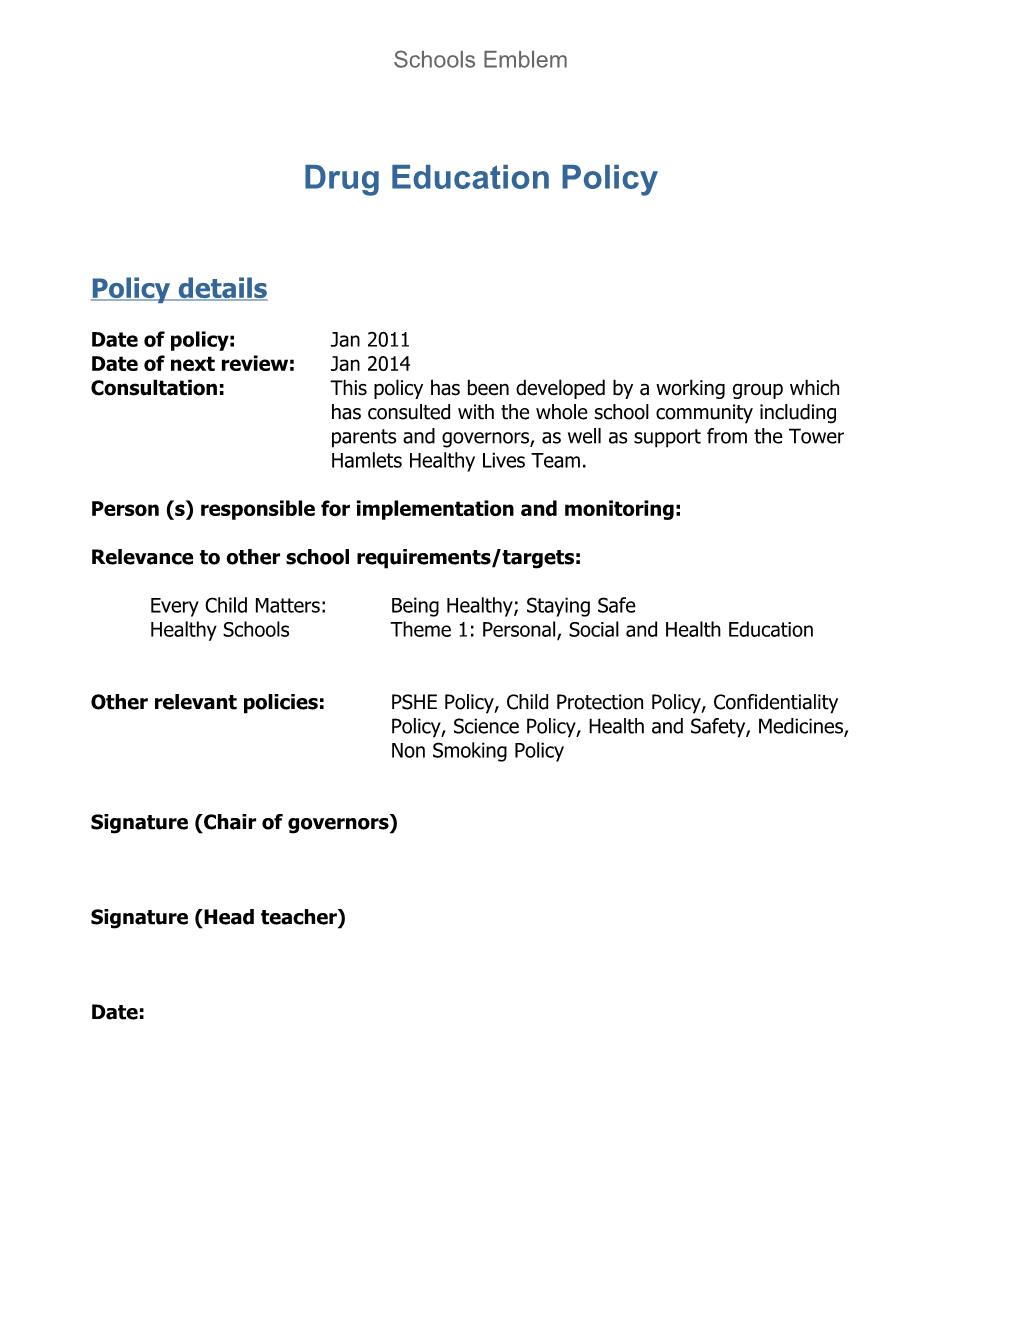 Drug Education Policy